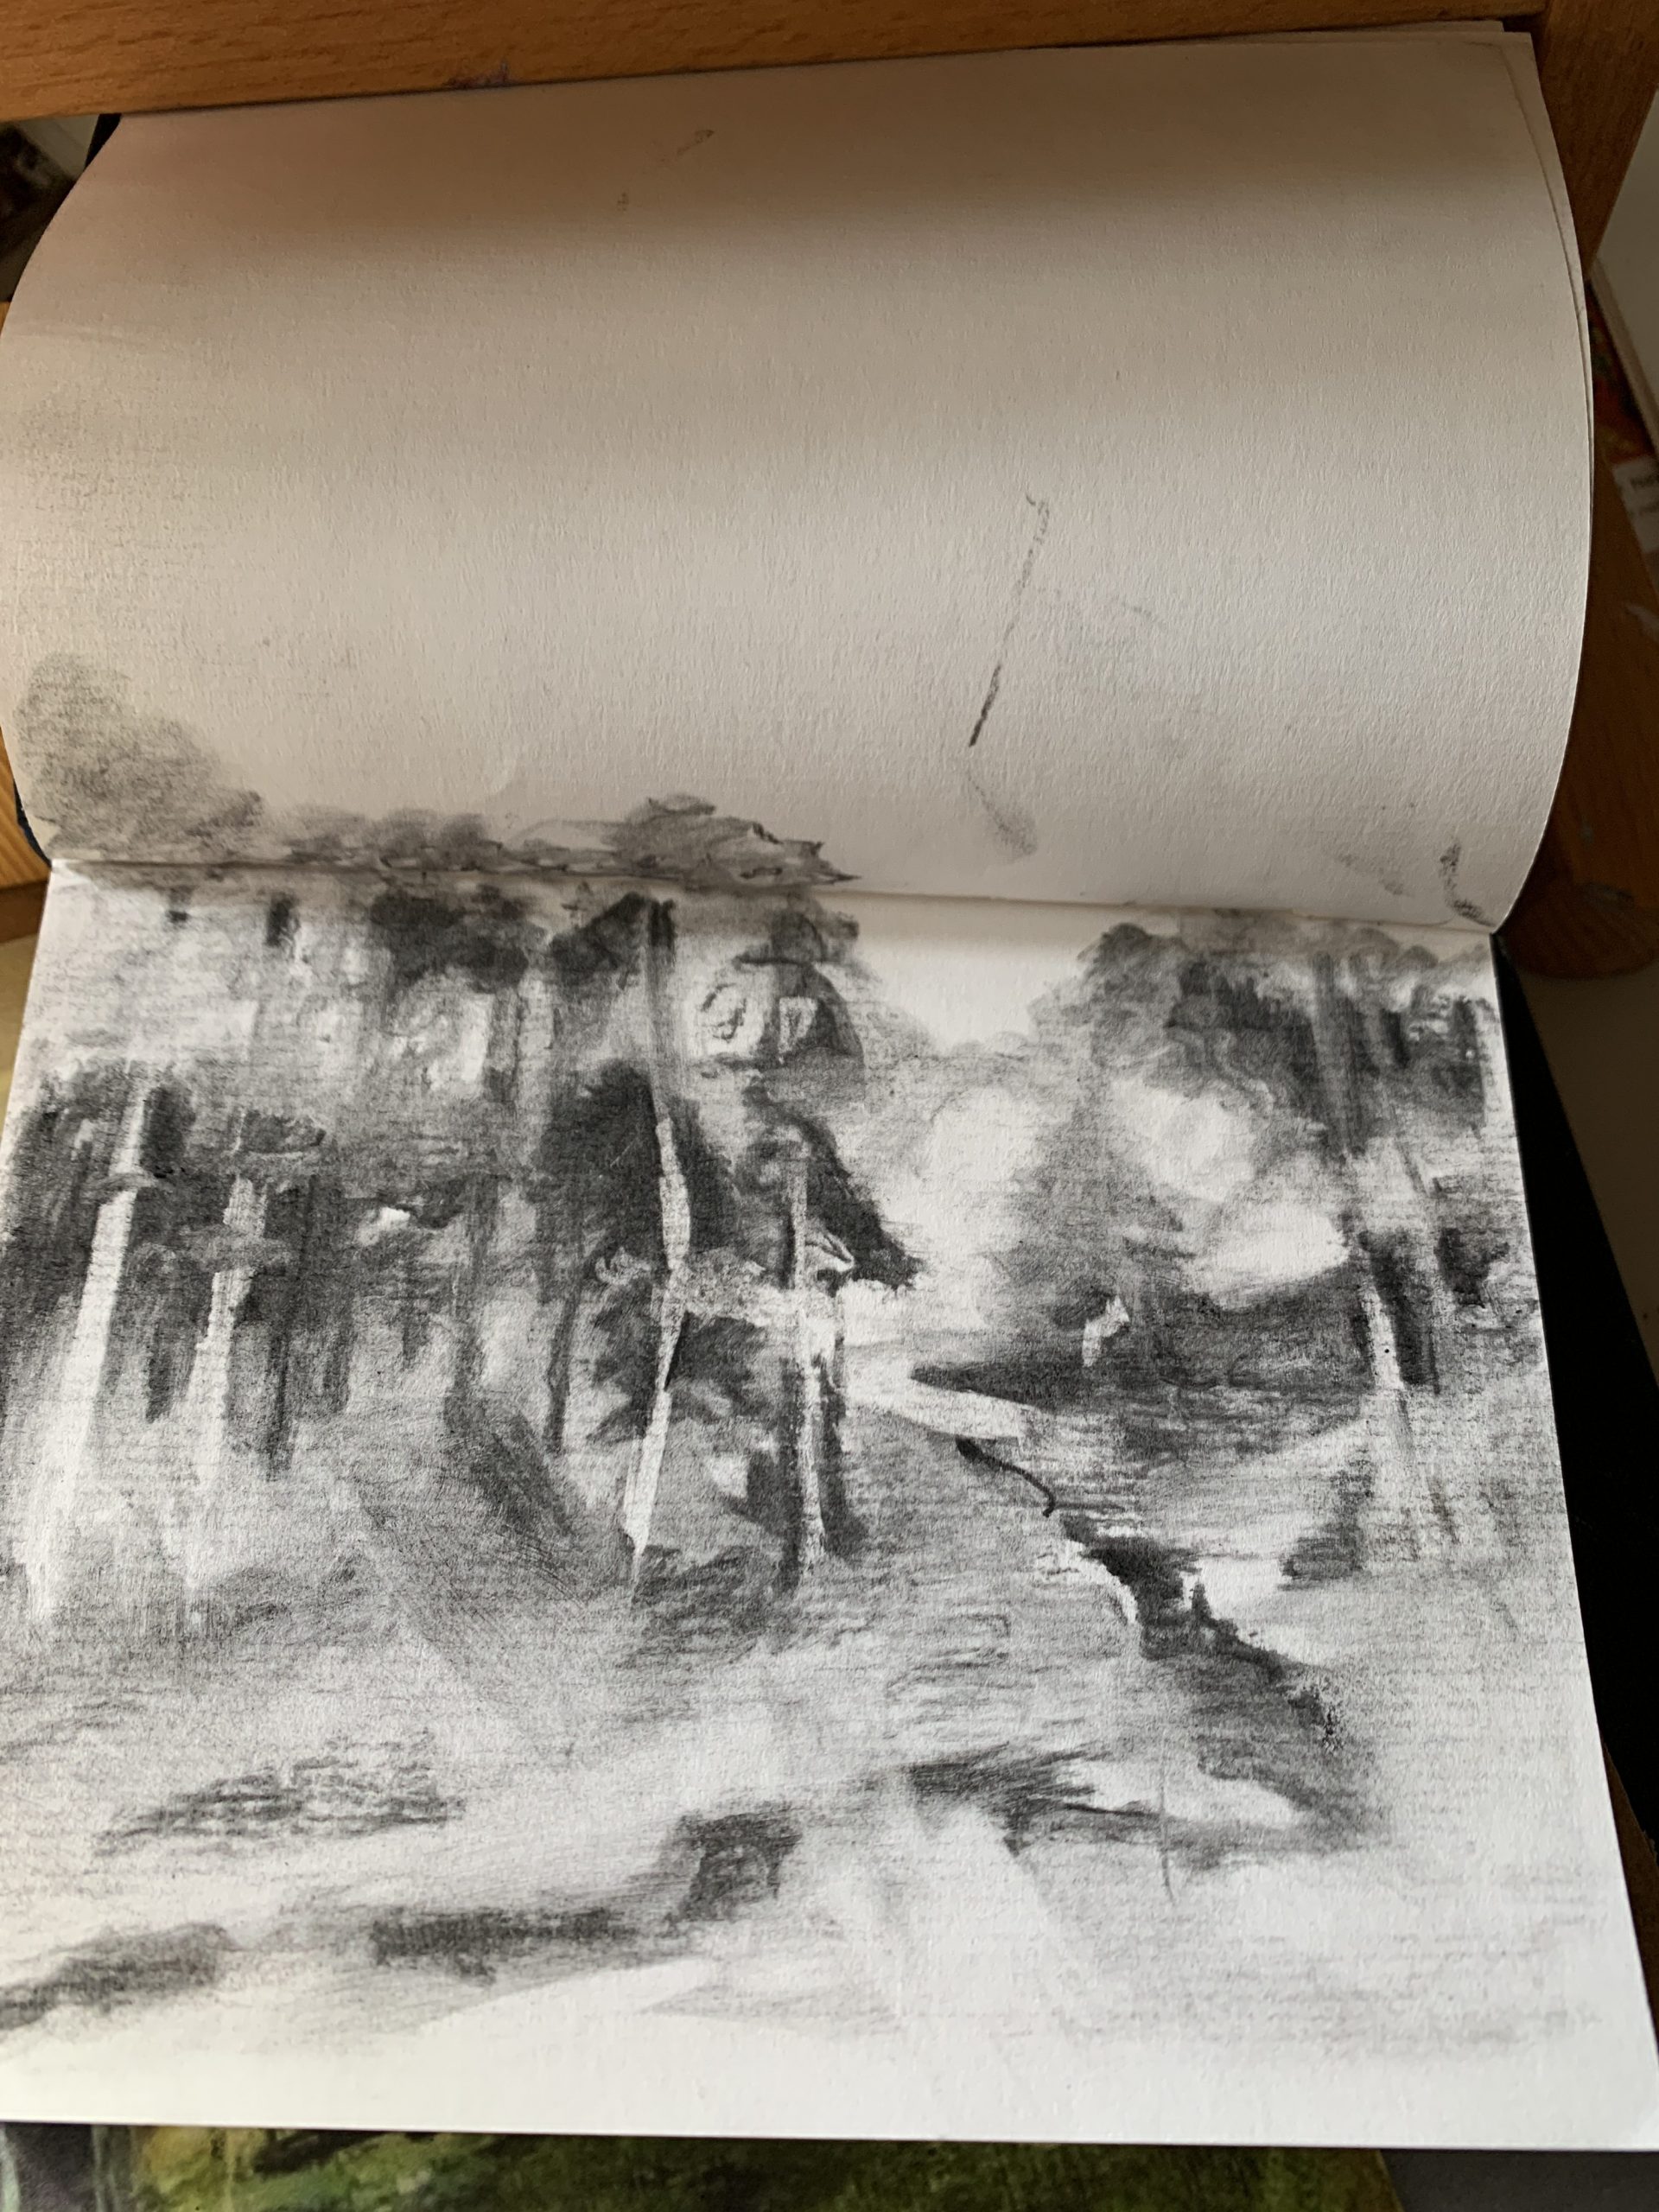 Charcoal sketch